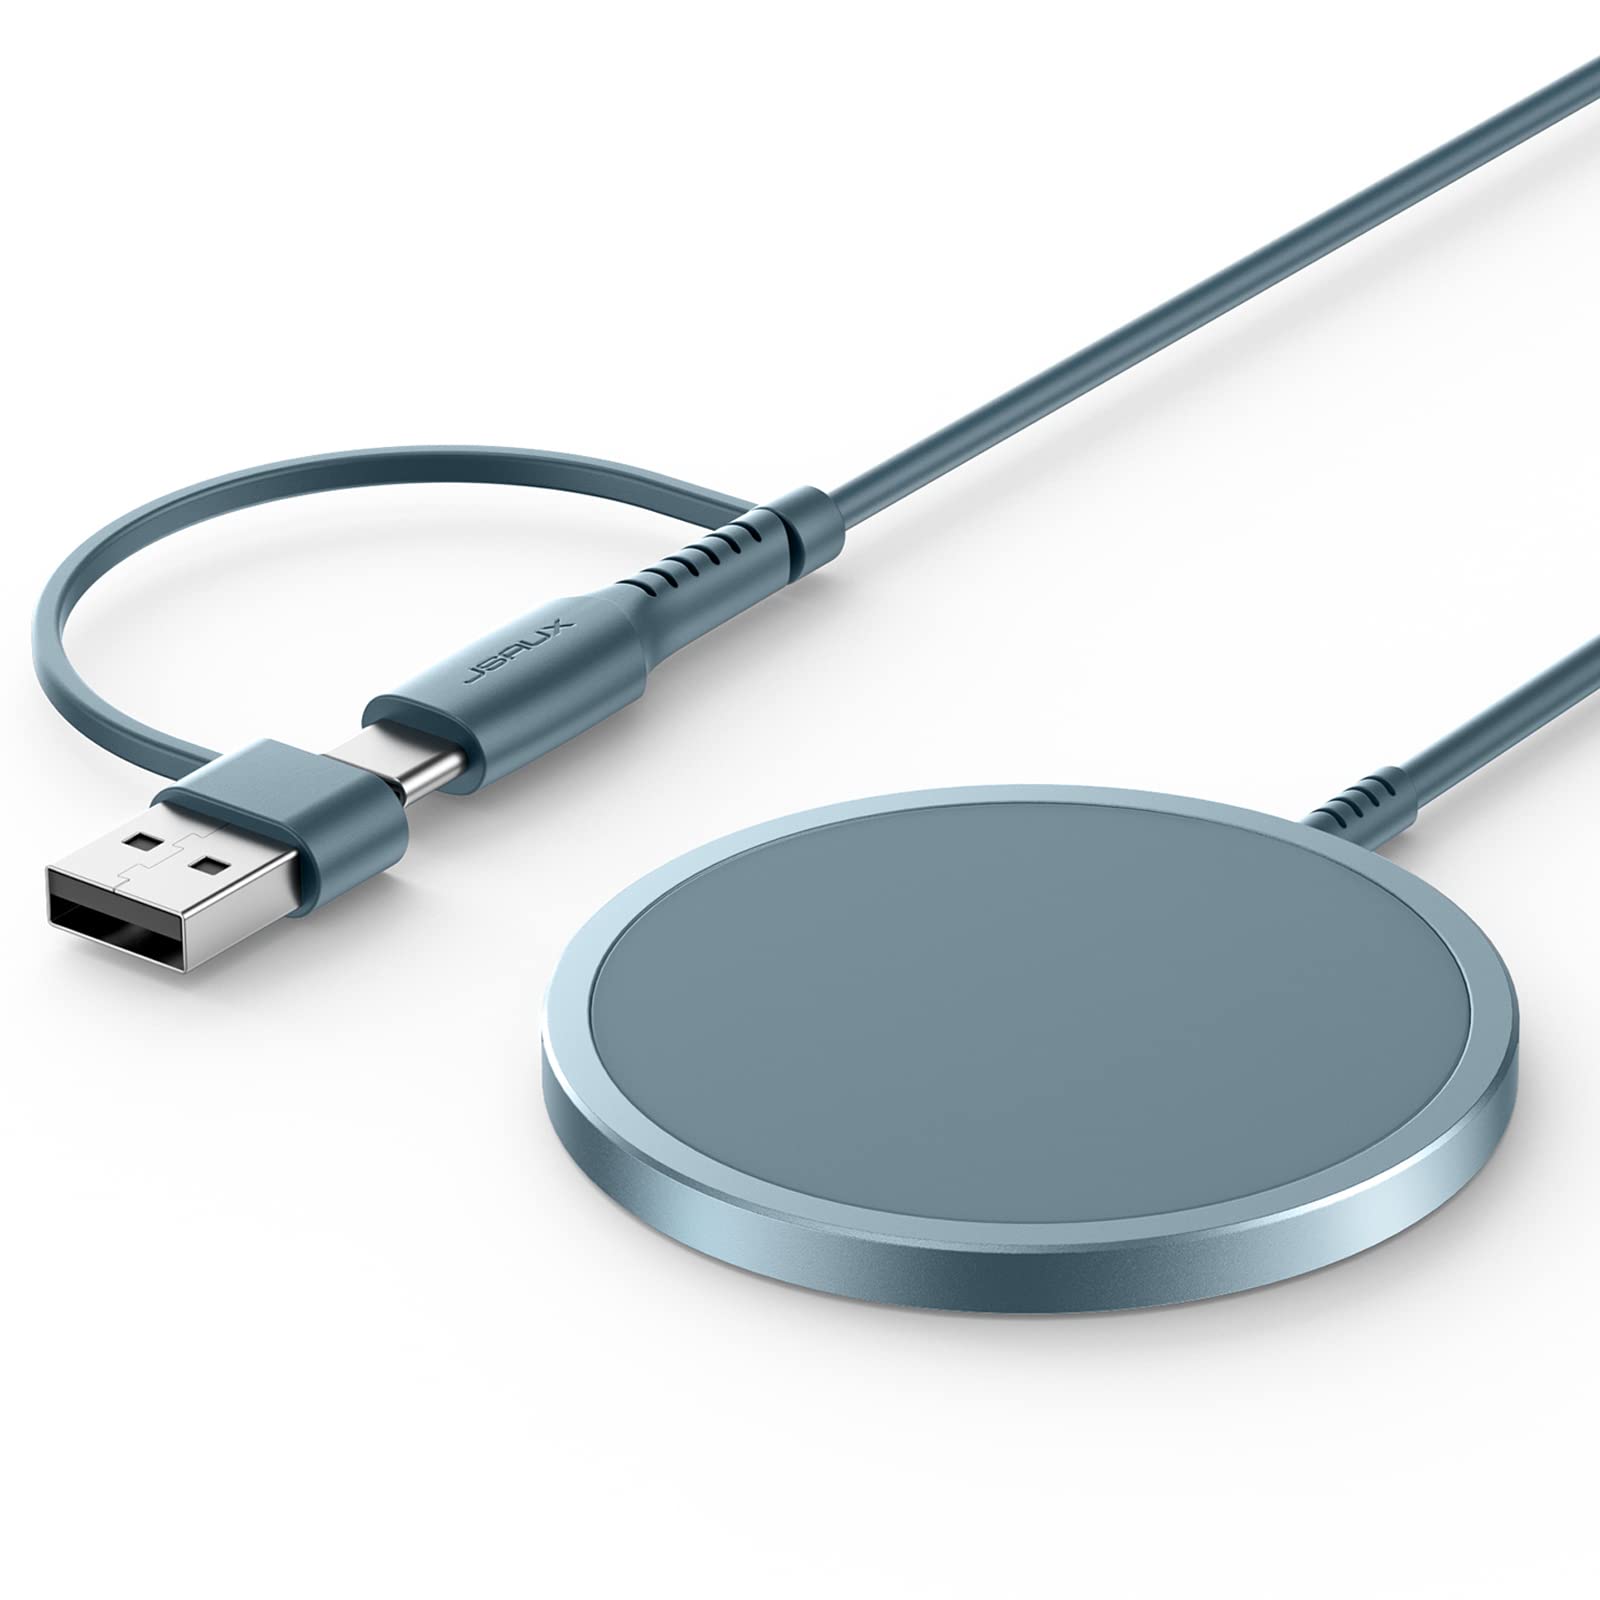 JSAUX Magsafe Magnetic Wireless Charger 40% off with 2 or more $18.99